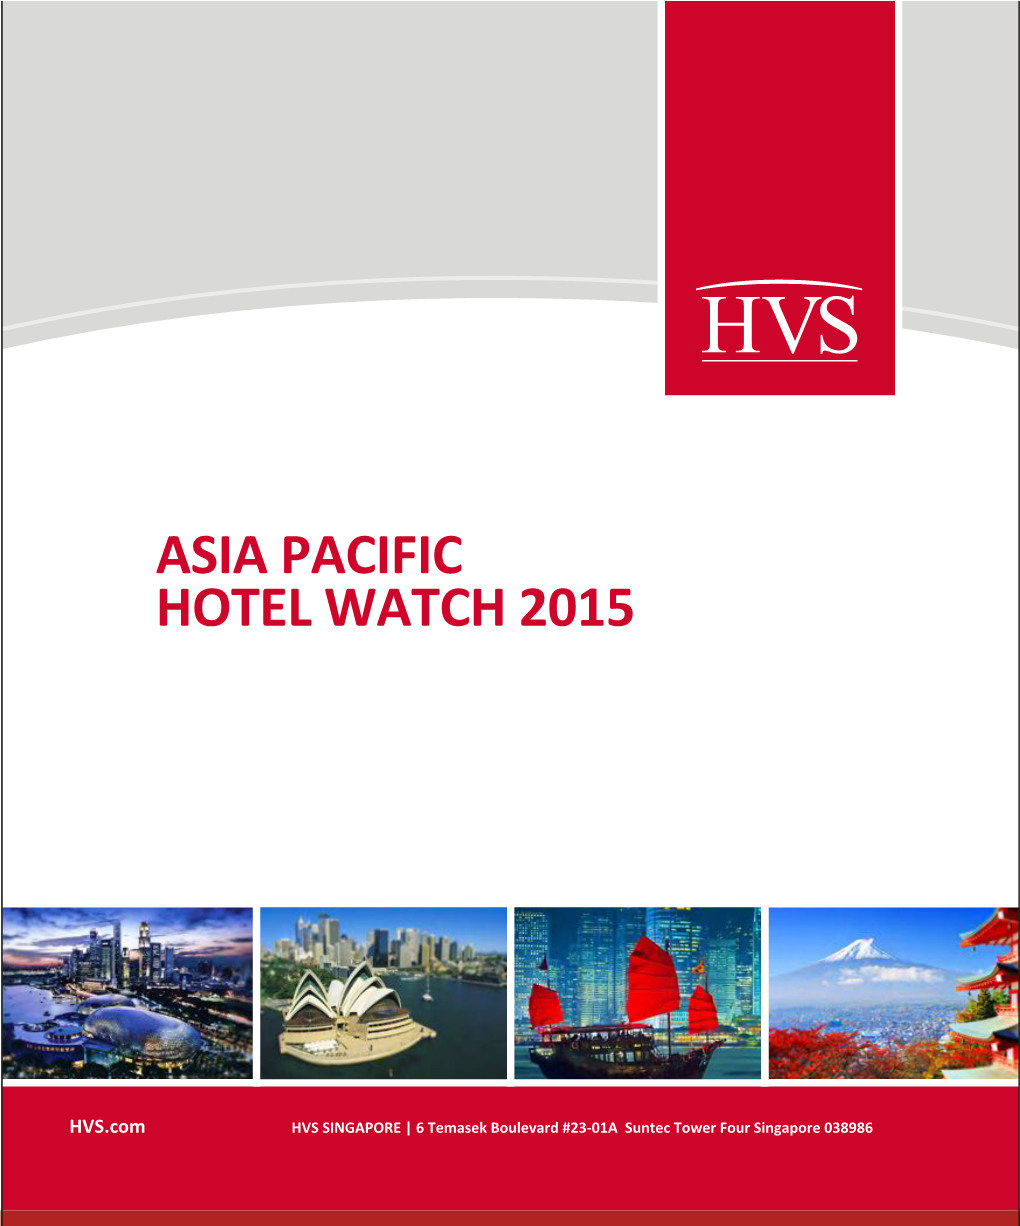 Asia Pacific Hotel Watch 2015